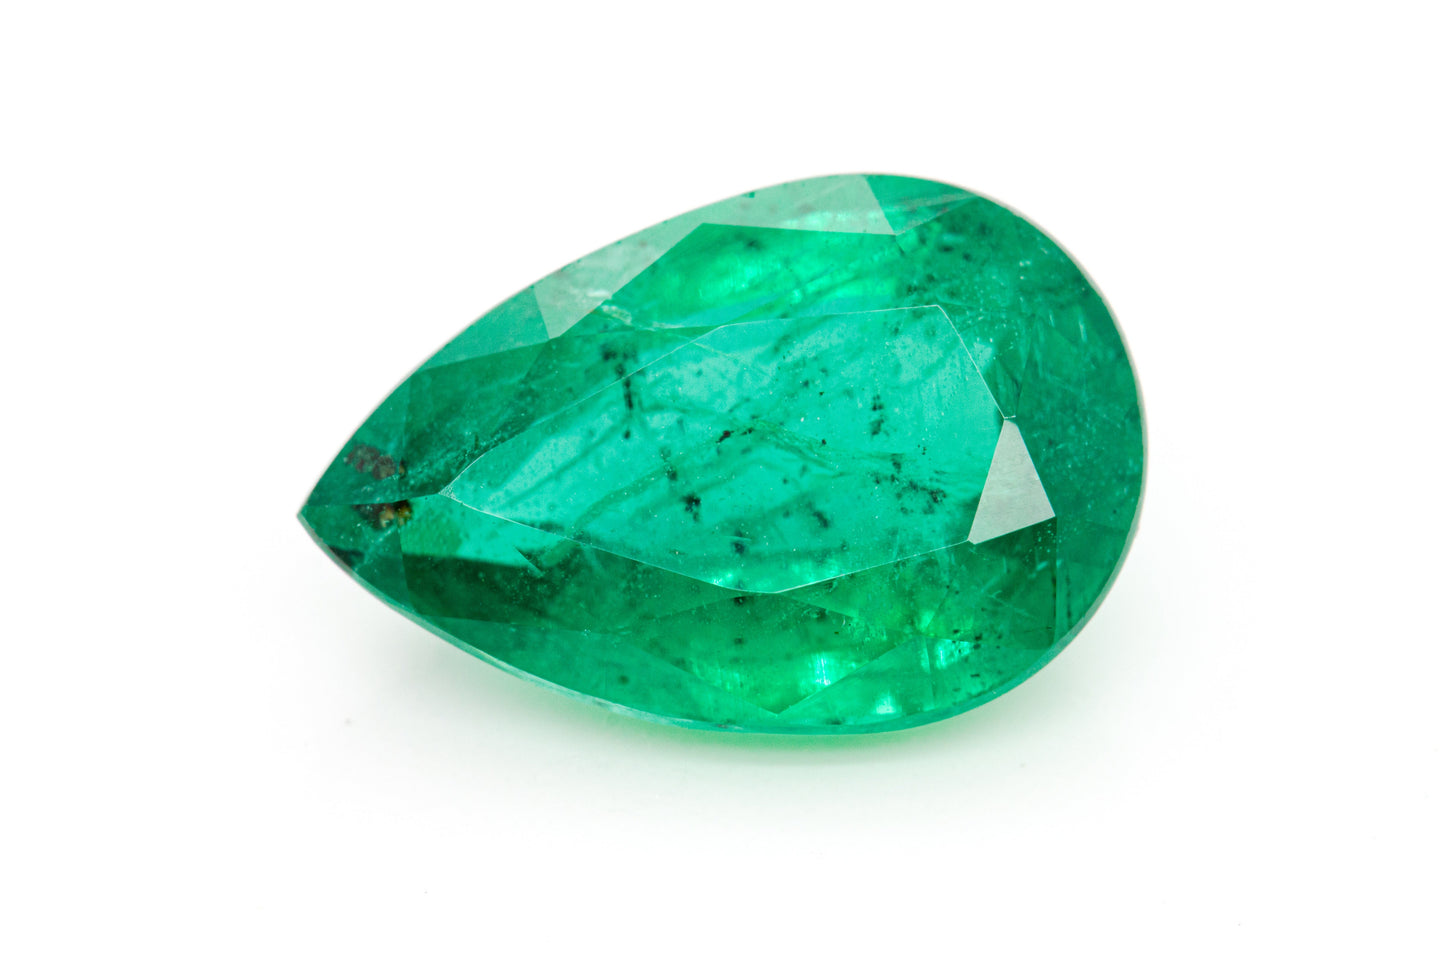 [SOLD] 13.24x8.78 mm Pear-Shape Emerald Certificated (EMP139)